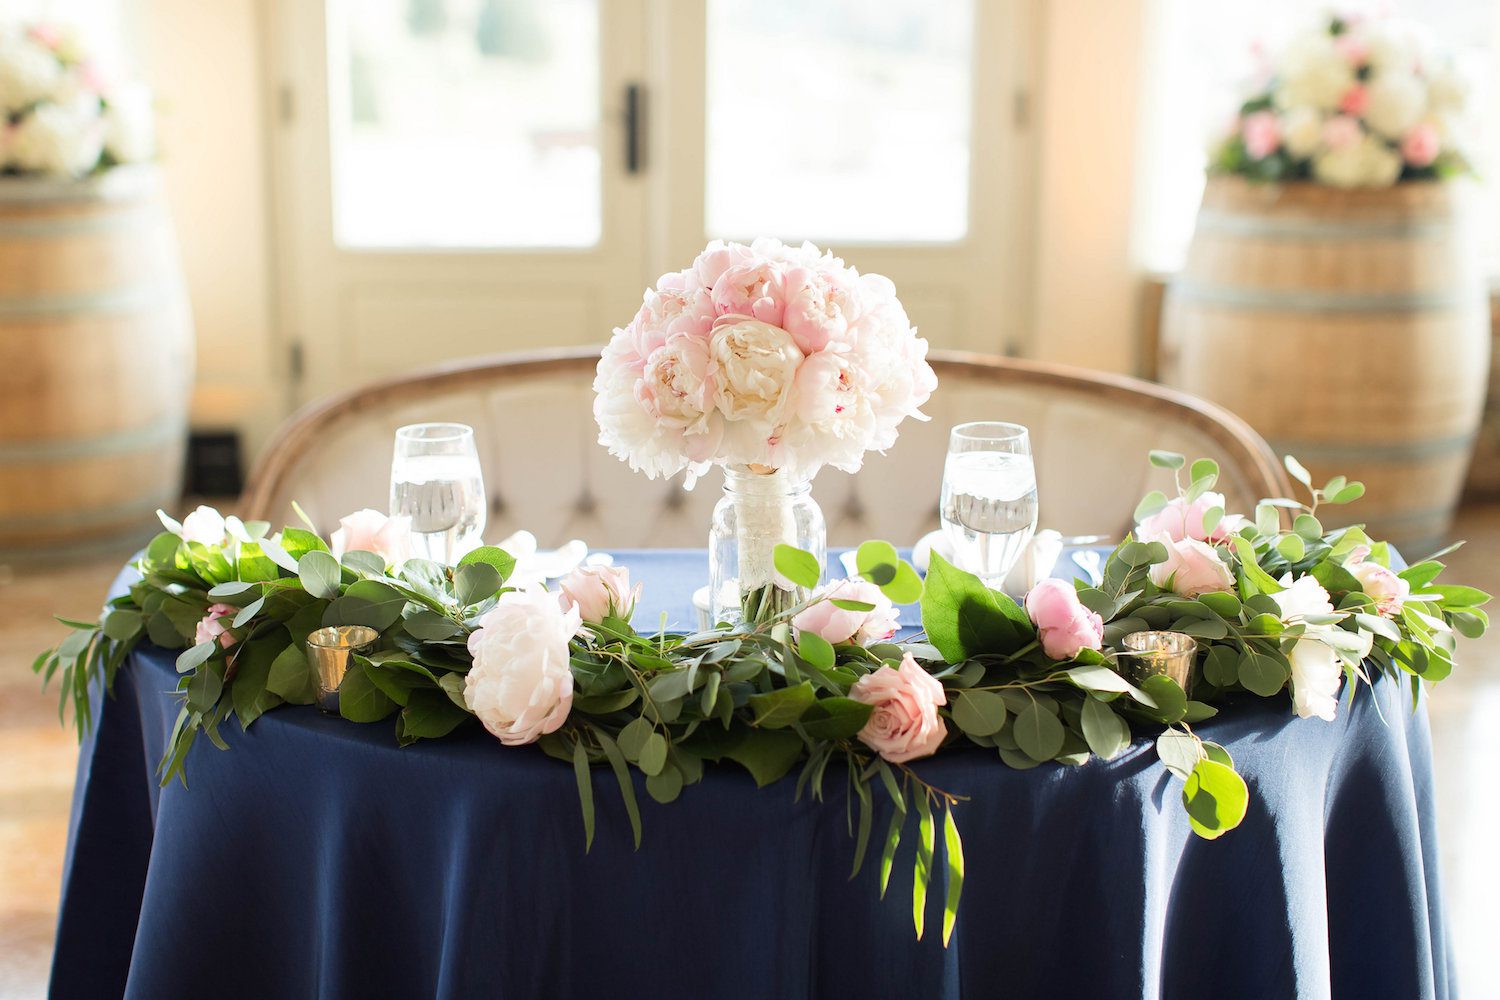 Candice Adelle Photography, navy linens with pink and white flowers and the bridal bouquet.